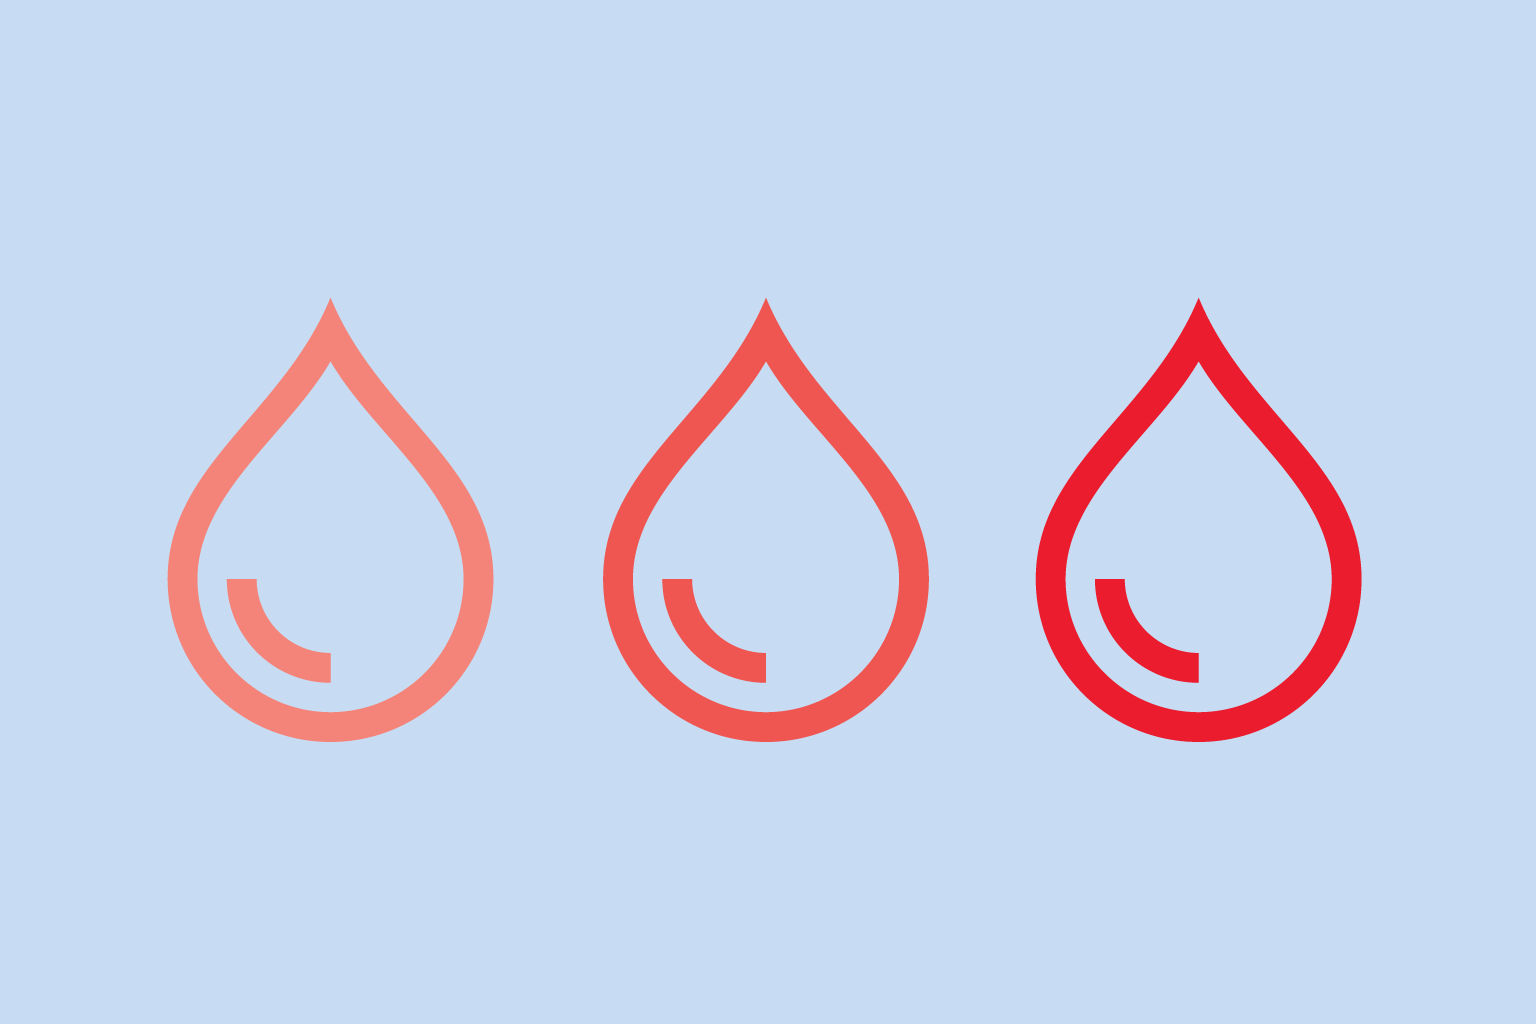 graphic showing 3 blood drops